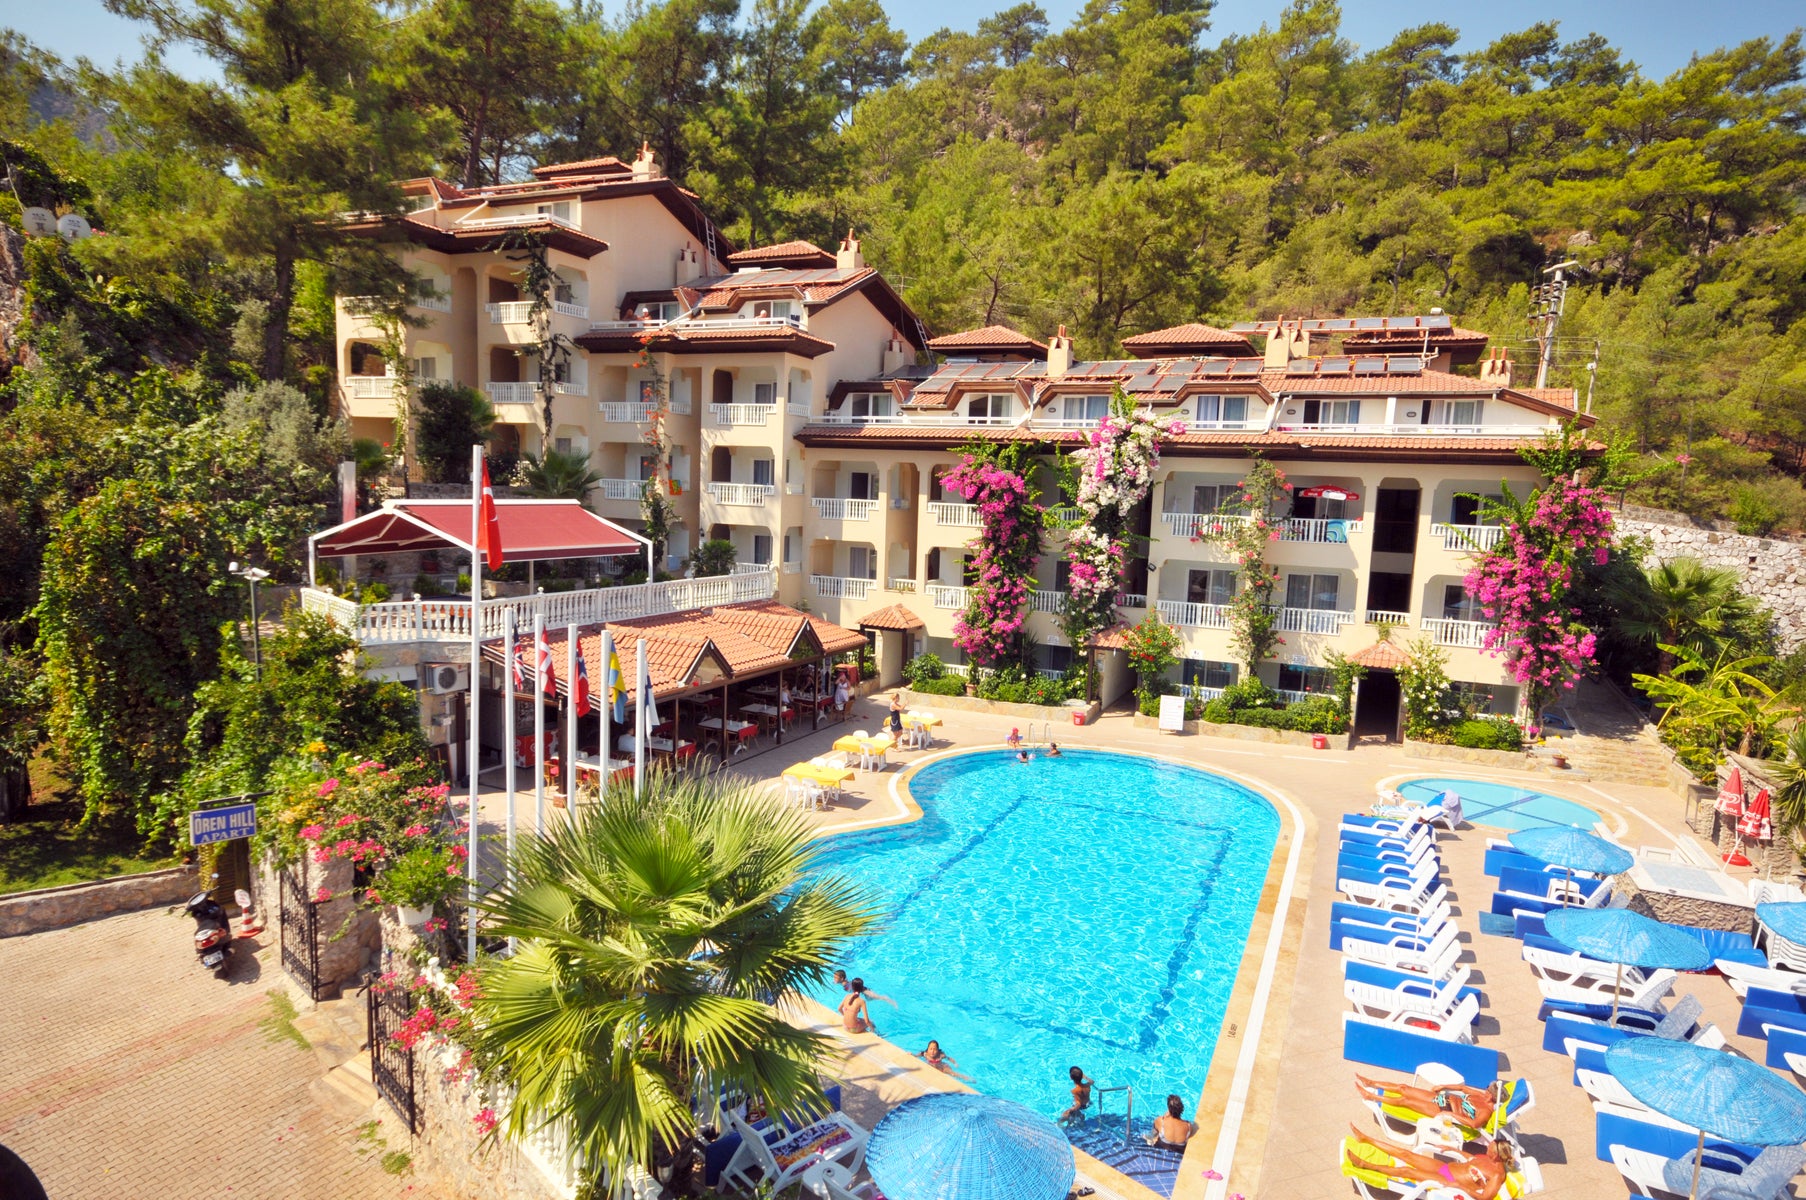 Holiday apartments in icmeler turkey